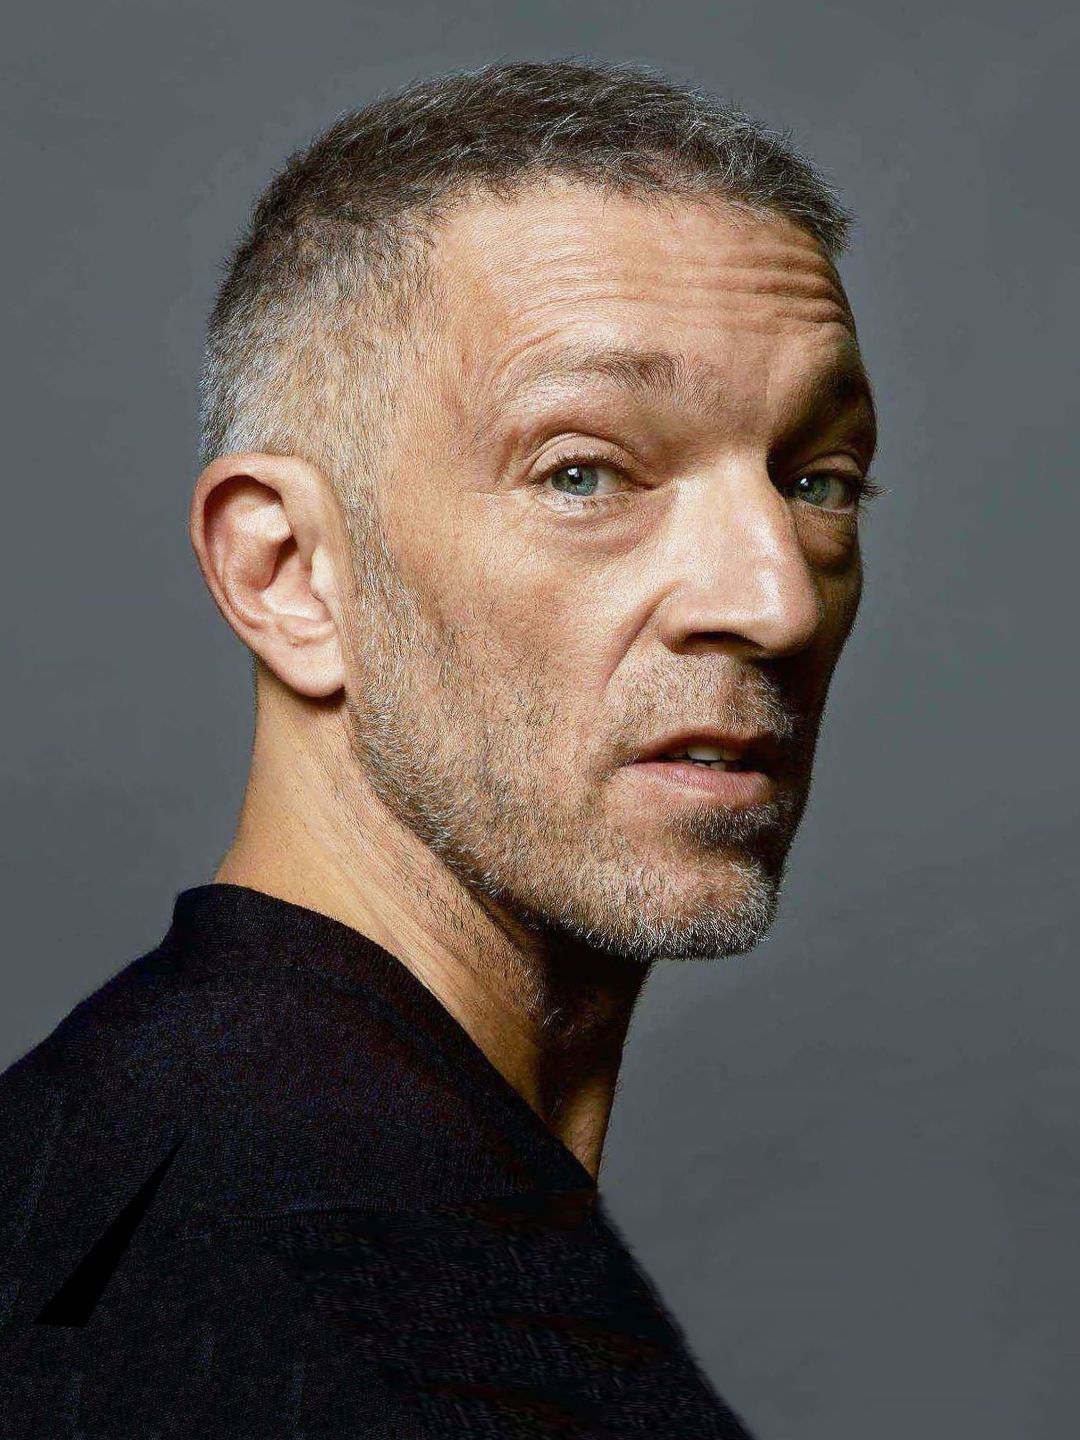 Vincent Cassel young age